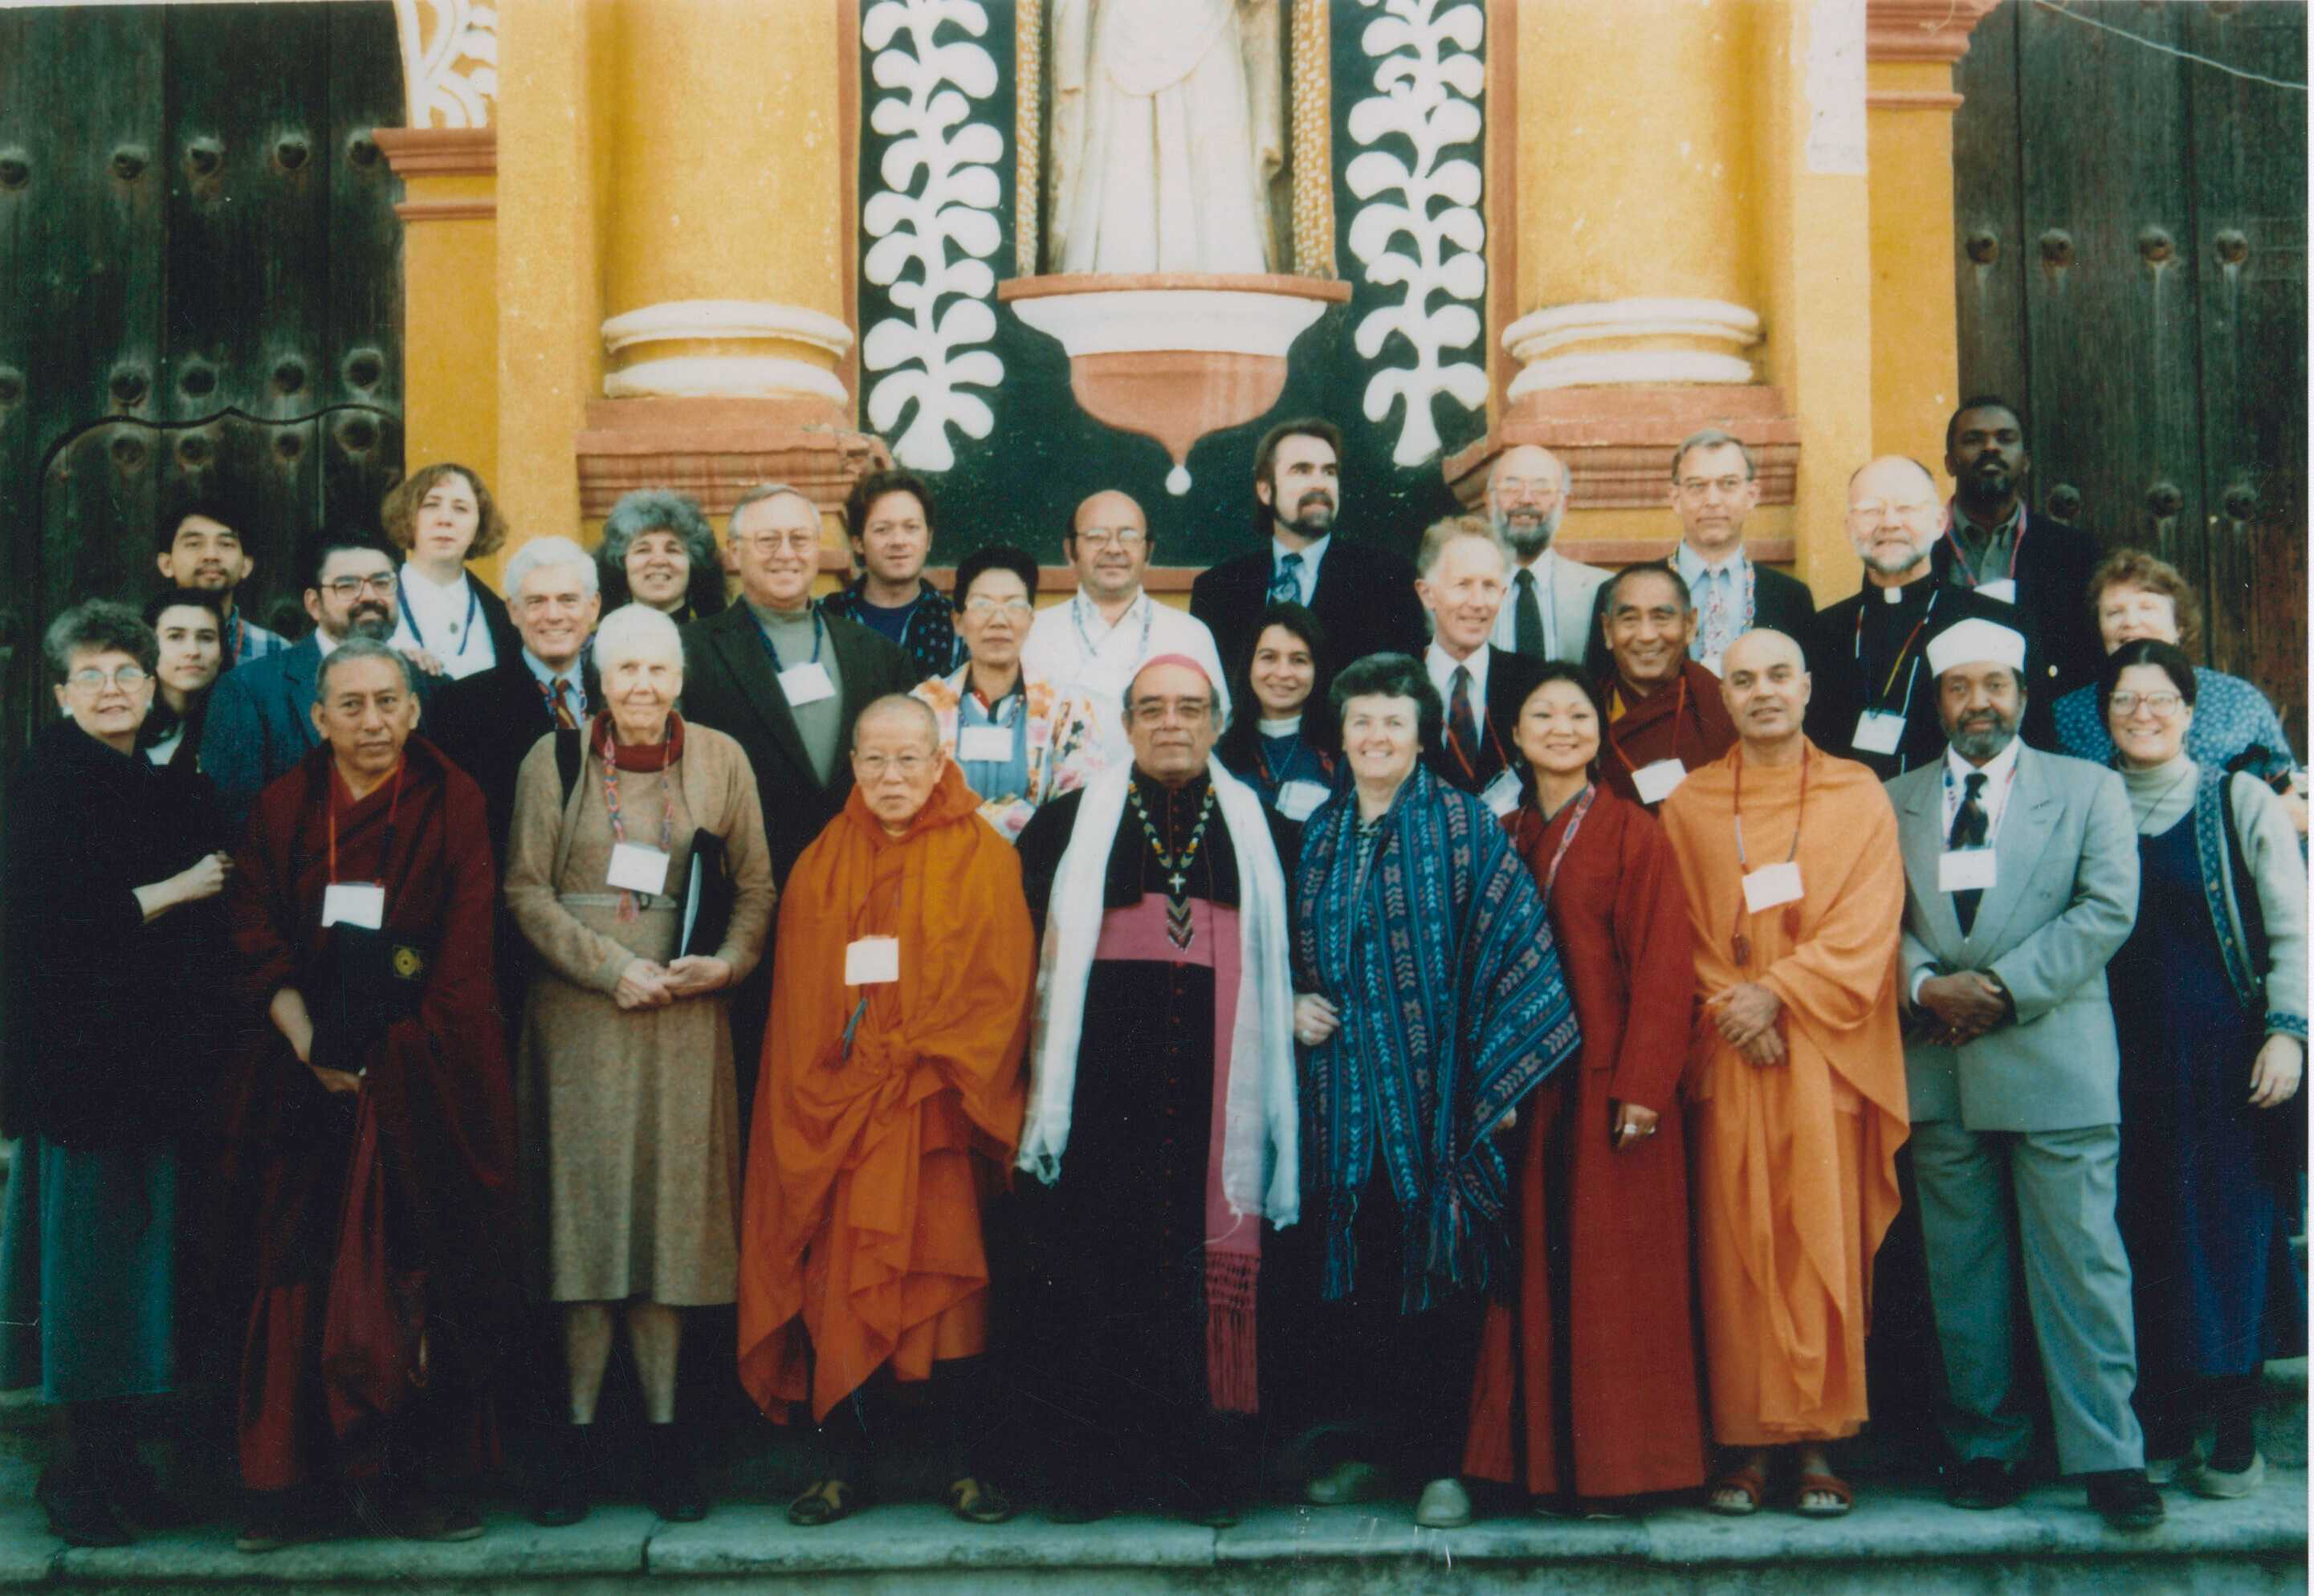 A color photograph group portrait of a group of interfaith leaders at the Vatican, including Imam W.D. Mohammed.